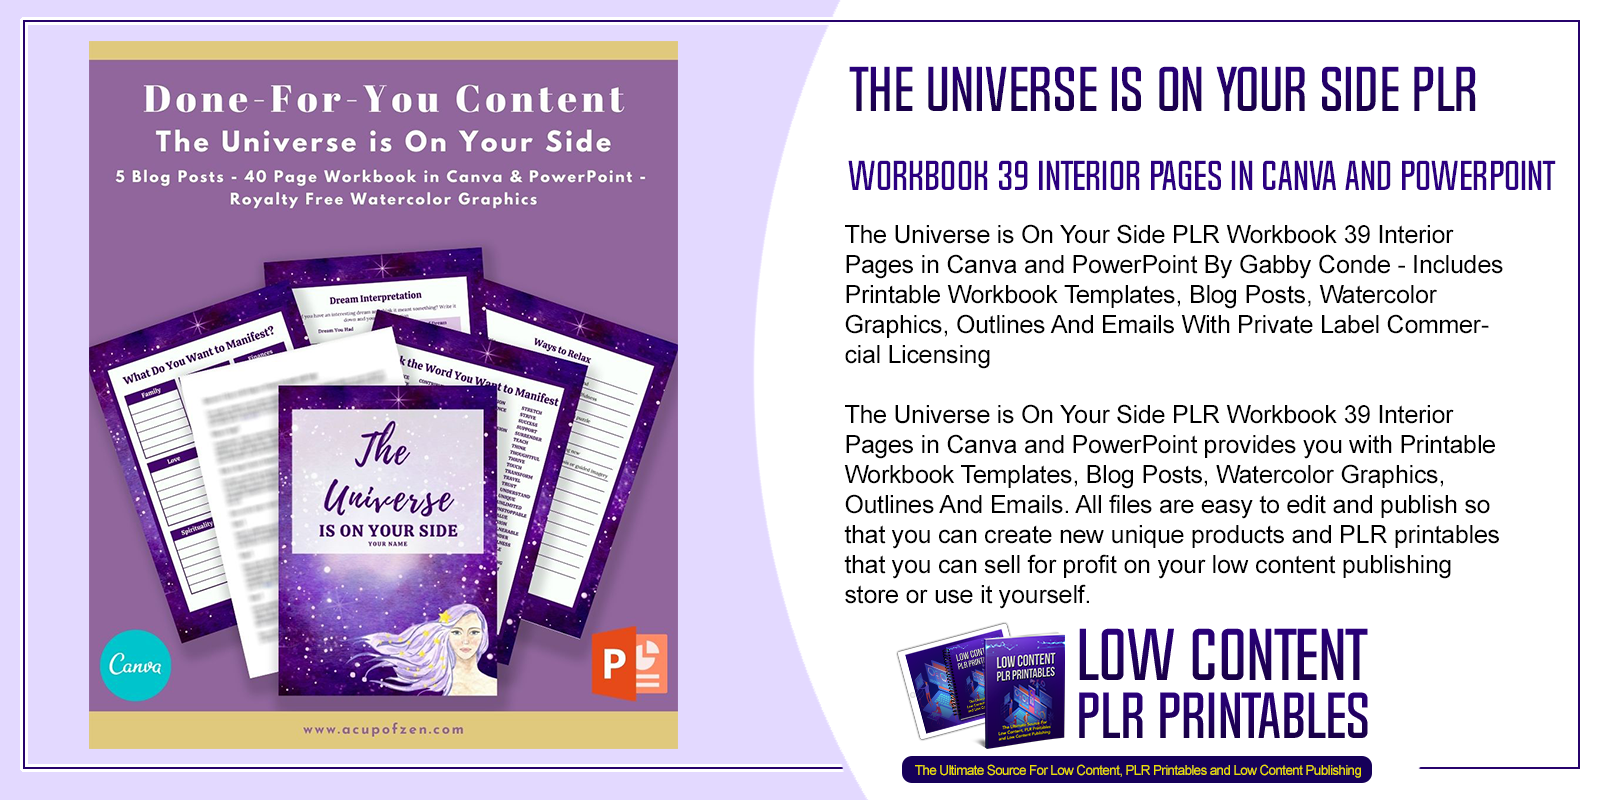 The Universe is On Your Side PLR Workbook 39 Interior Pages in Canva and PowerPoint